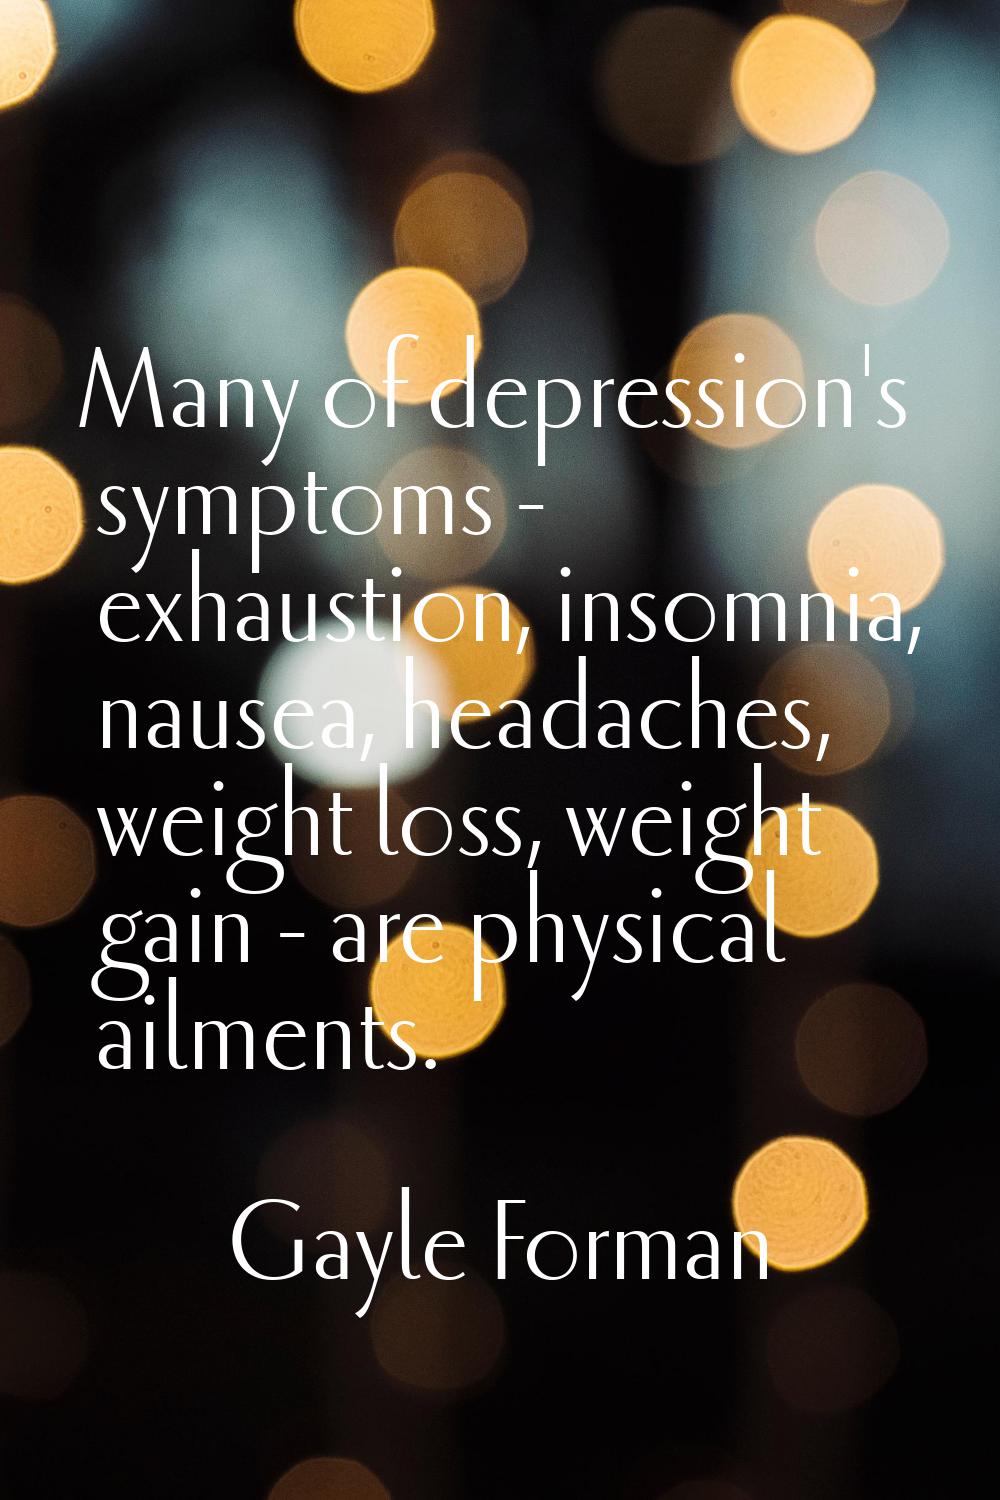 Many of depression's symptoms - exhaustion, insomnia, nausea, headaches, weight loss, weight gain -